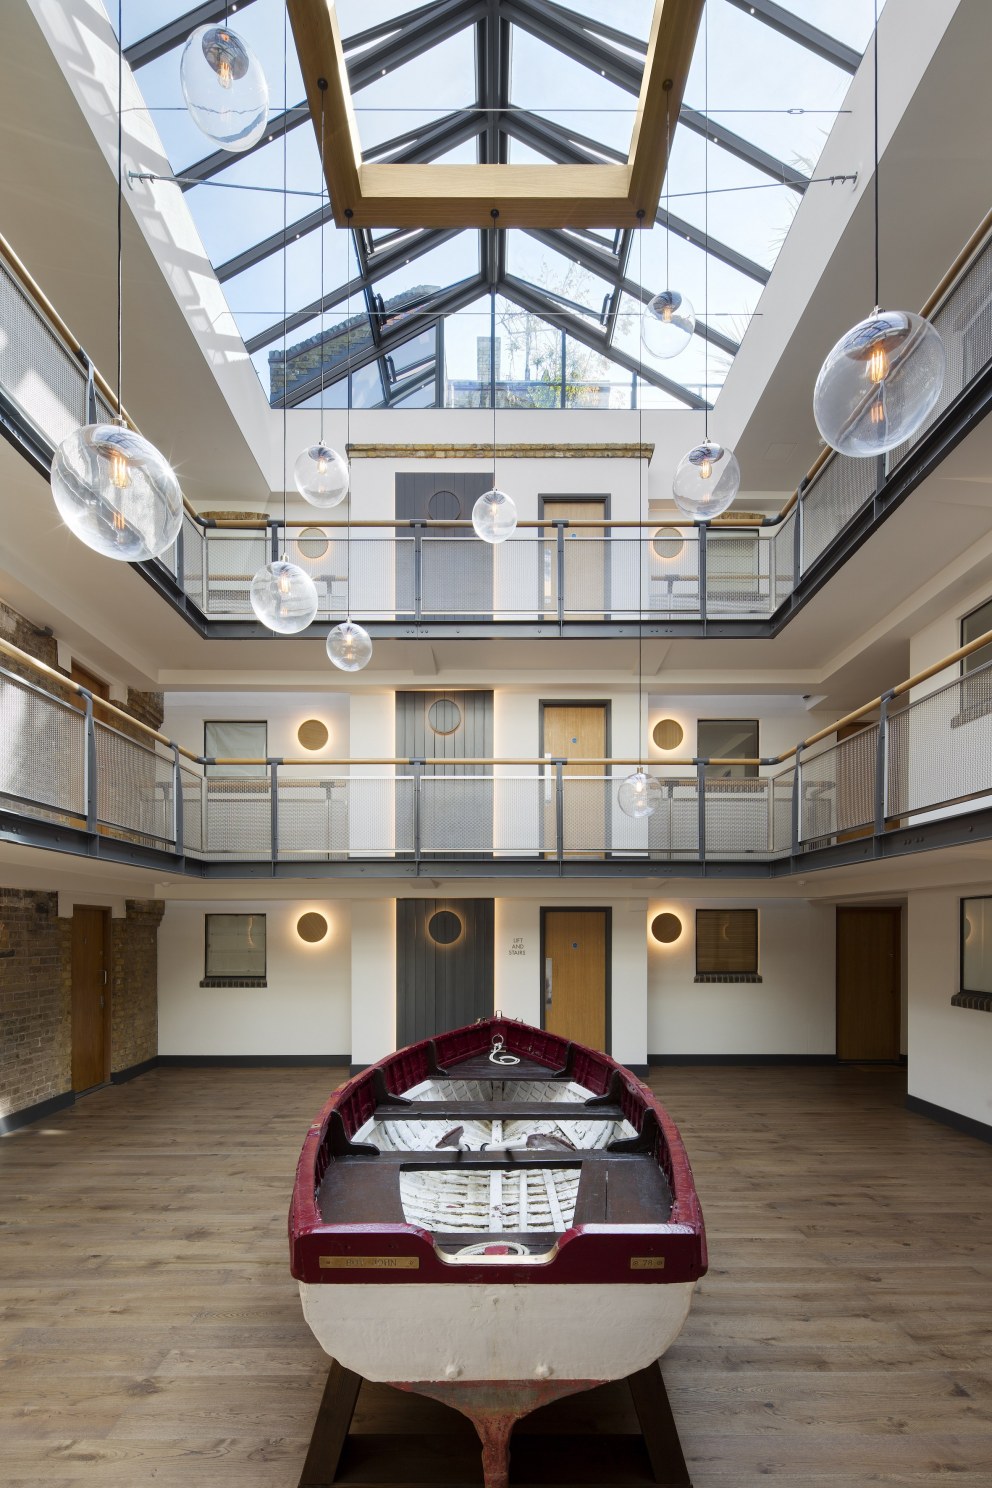 Residential apartment building atrium - Wapping High Street | Main atrium with bespoke industrial chandelier and restored lifeboat | Interior Designers